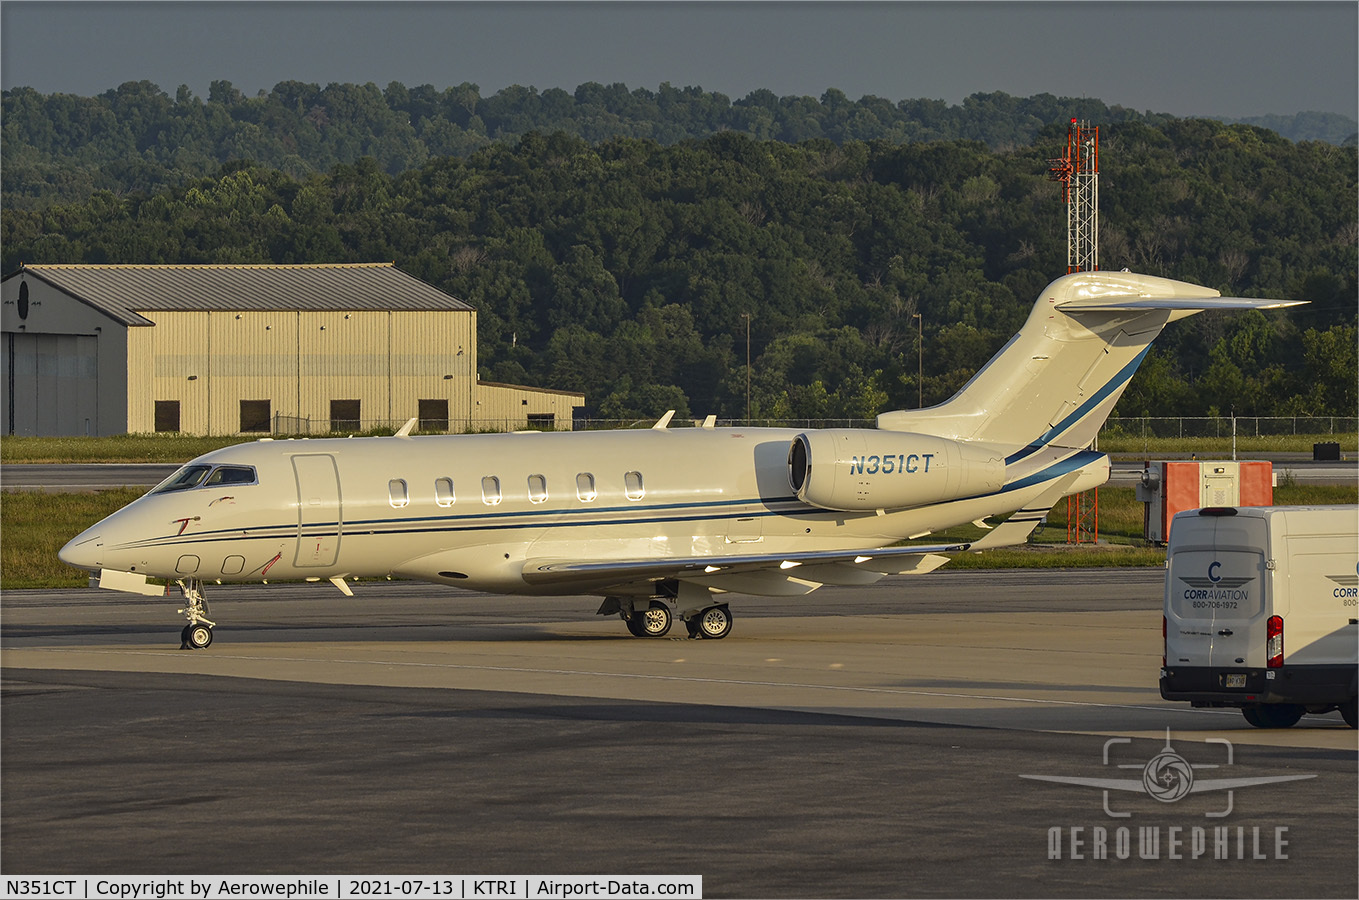 N351CT, 2019 Bombardier Challenger 350 (BD-100-1A10) C/N 20770, Parked at Tri-Cities Airport (KTRI)
13Jul21